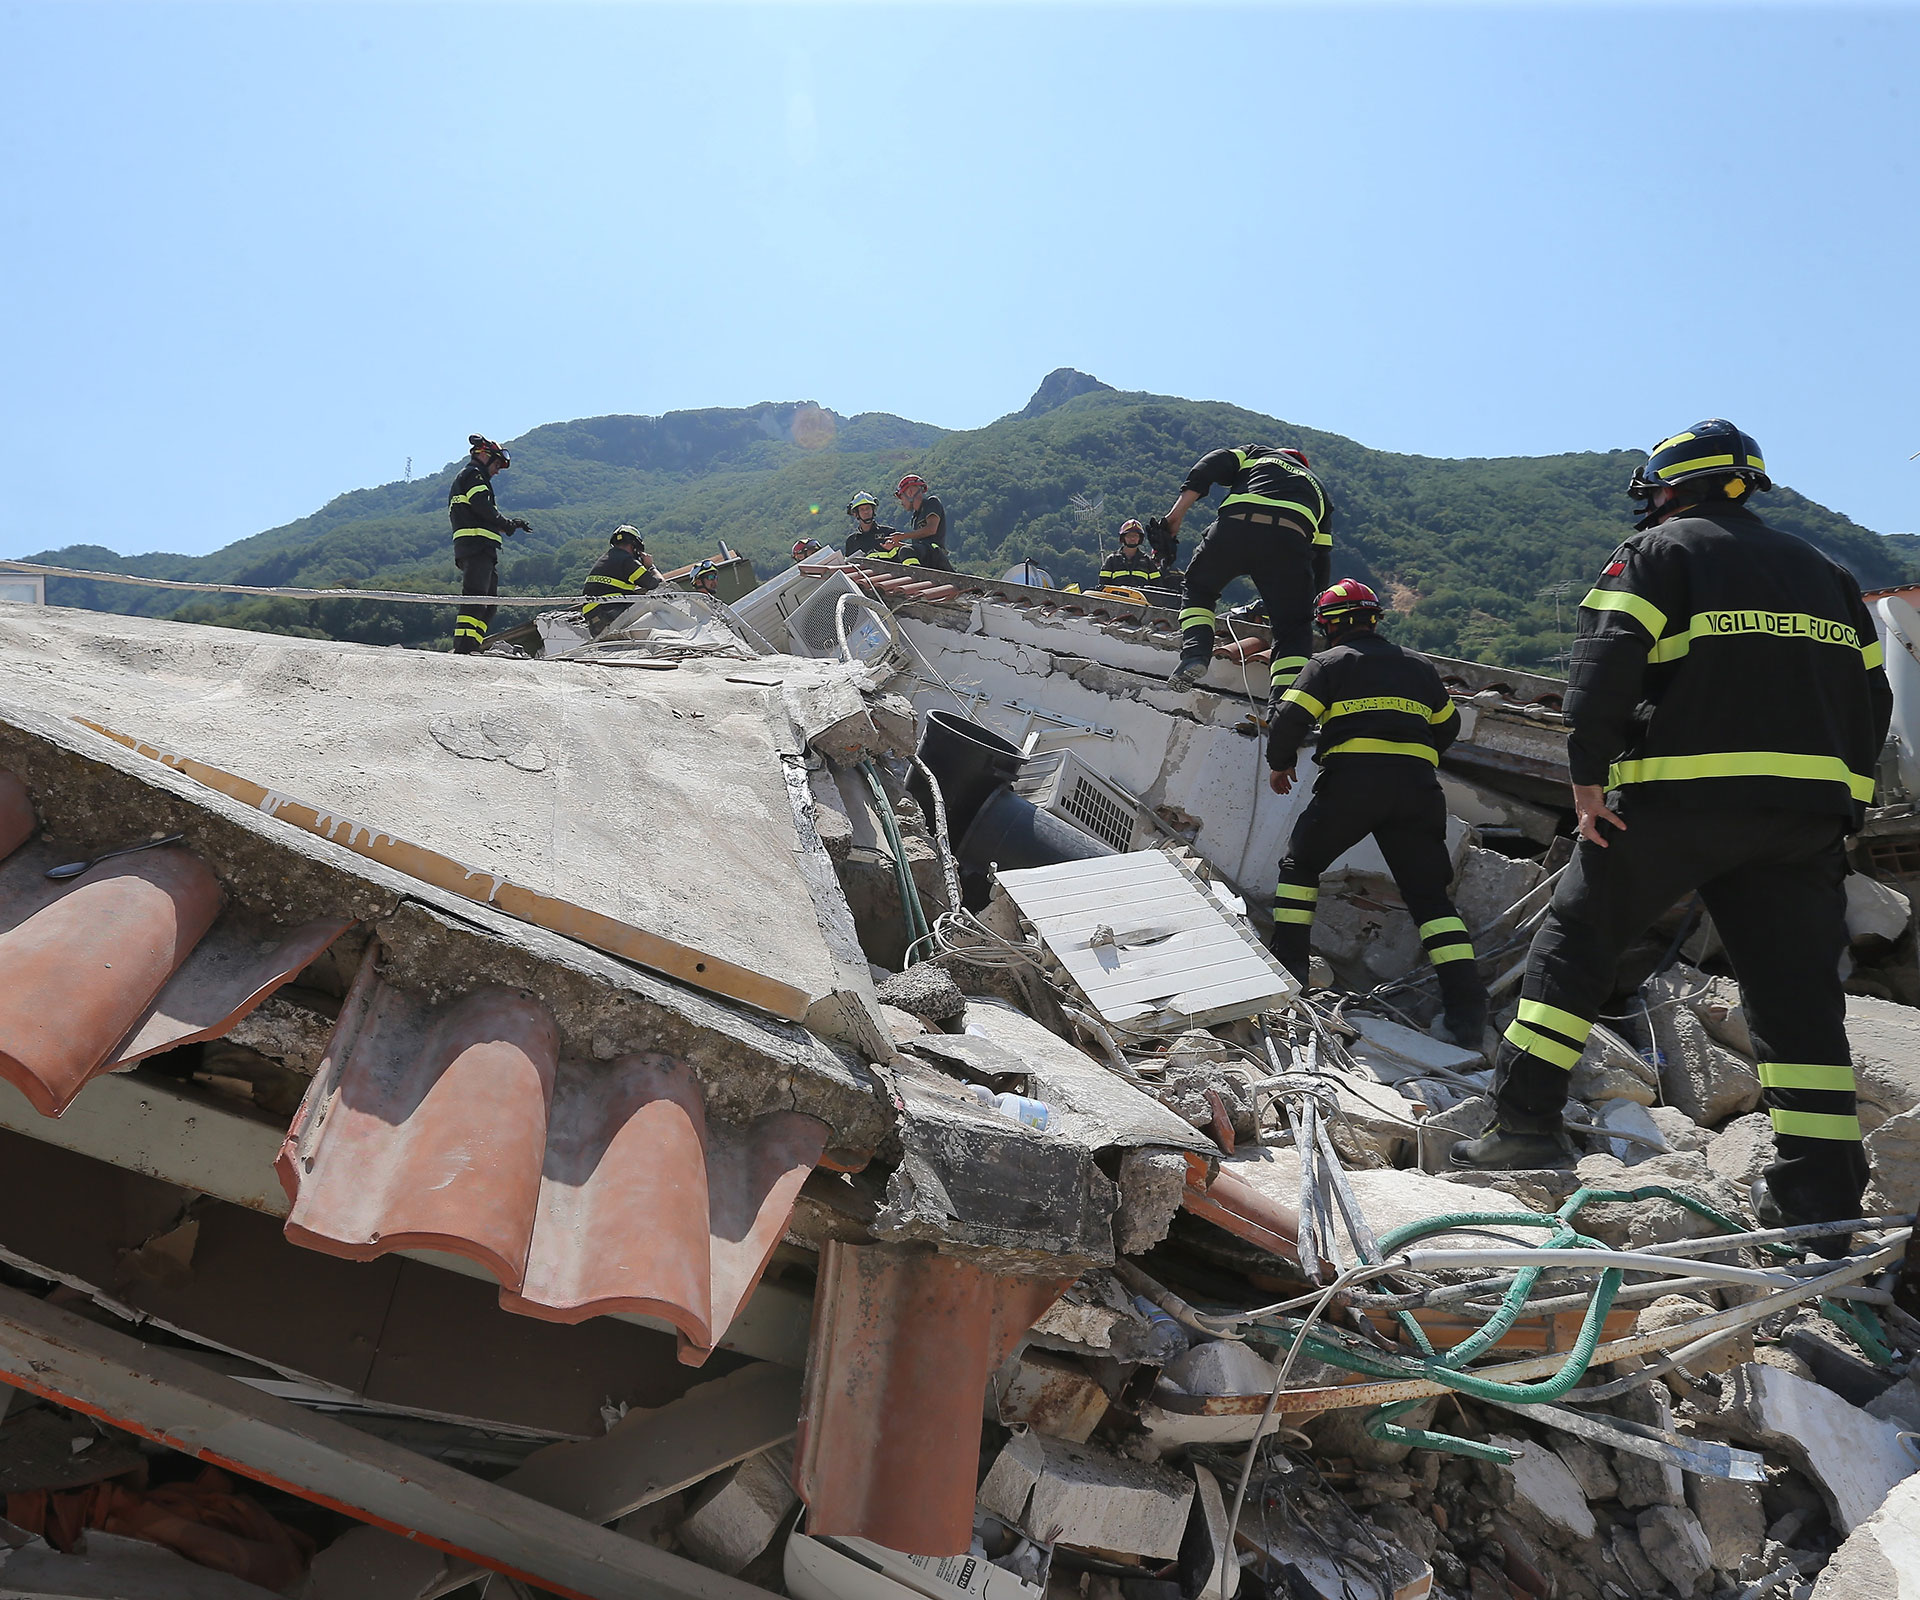 Baby and two brothers rescued from rubble after deadly Italy earthquake